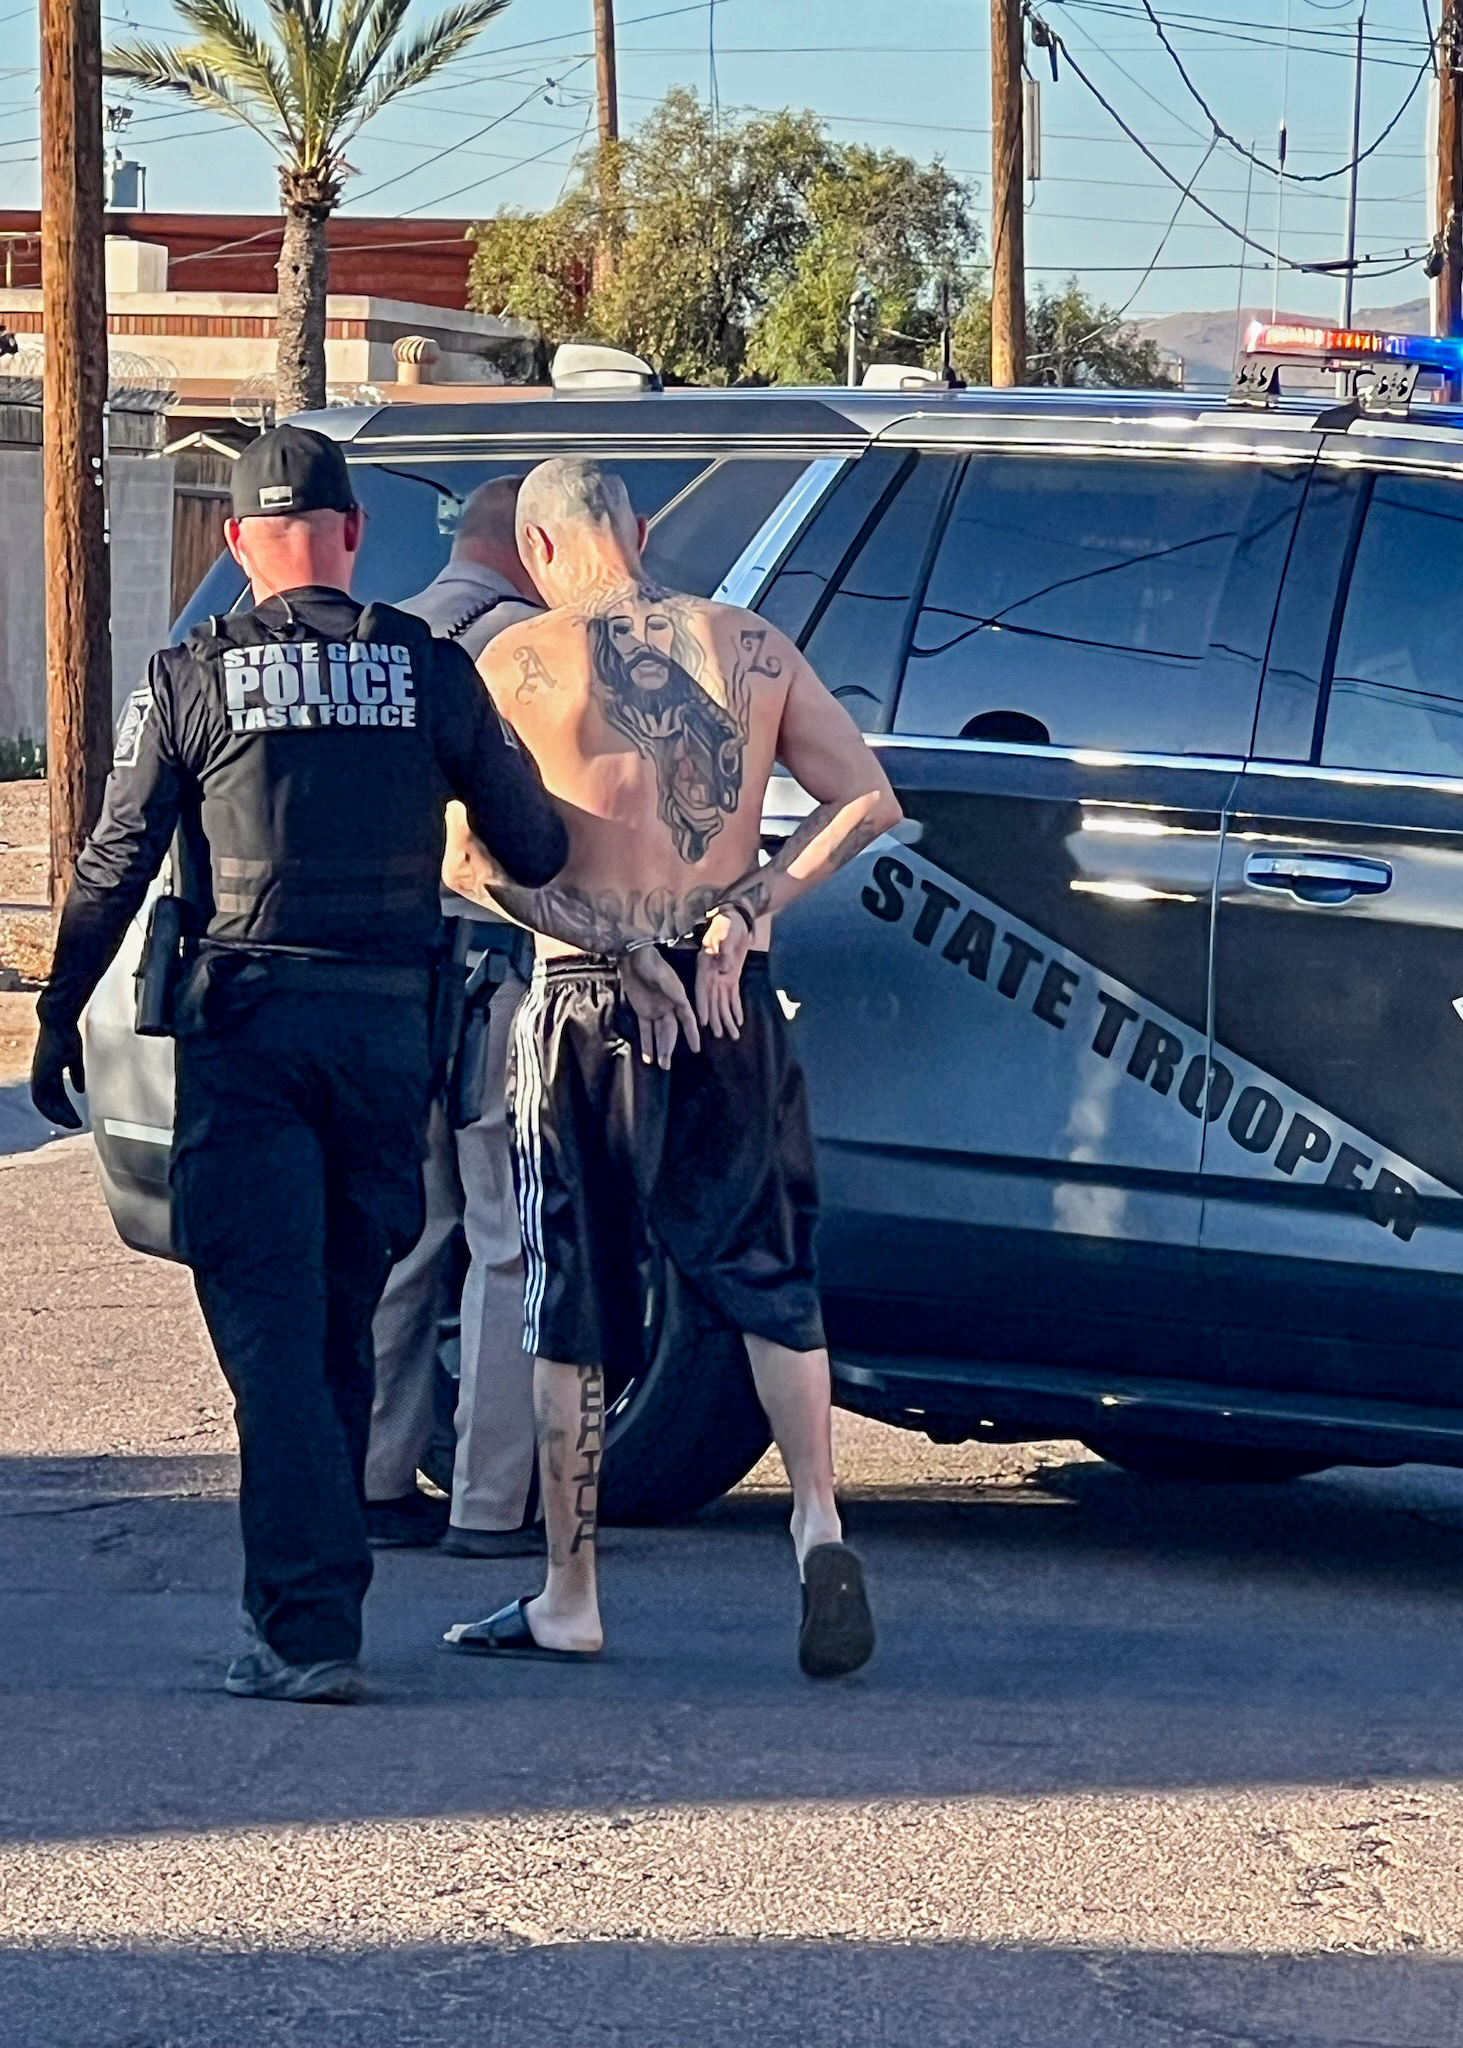 A State Gang Task Force detective escorts a man in handcuffs towards a police vehicle